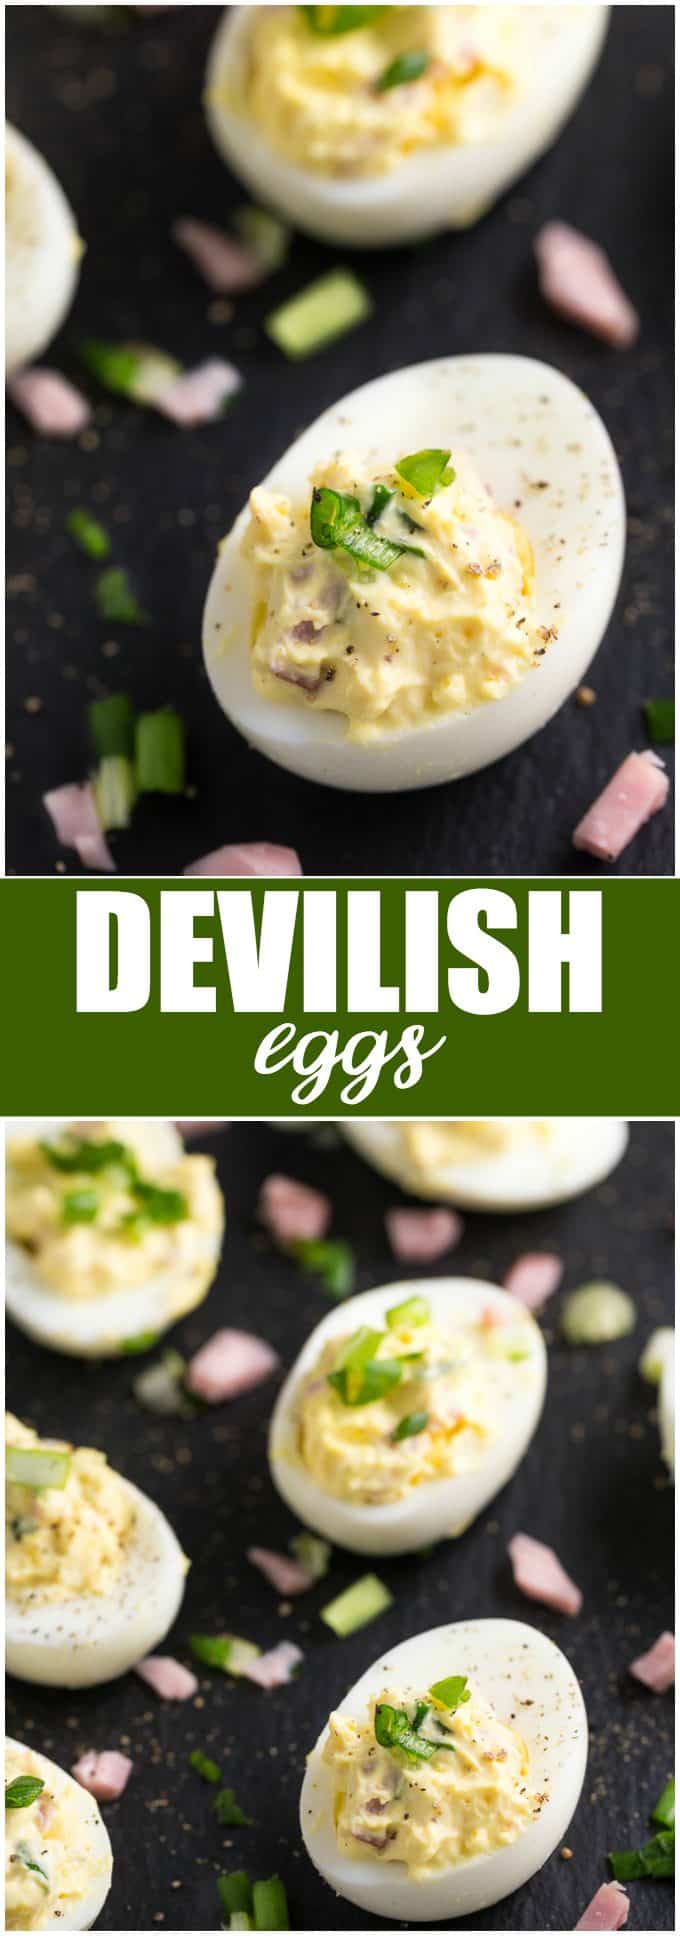 Devilish Eggs - Not your ordinary deviled egg recipe. This easy appetizer has Dijon mustard, ham and NO paprika!